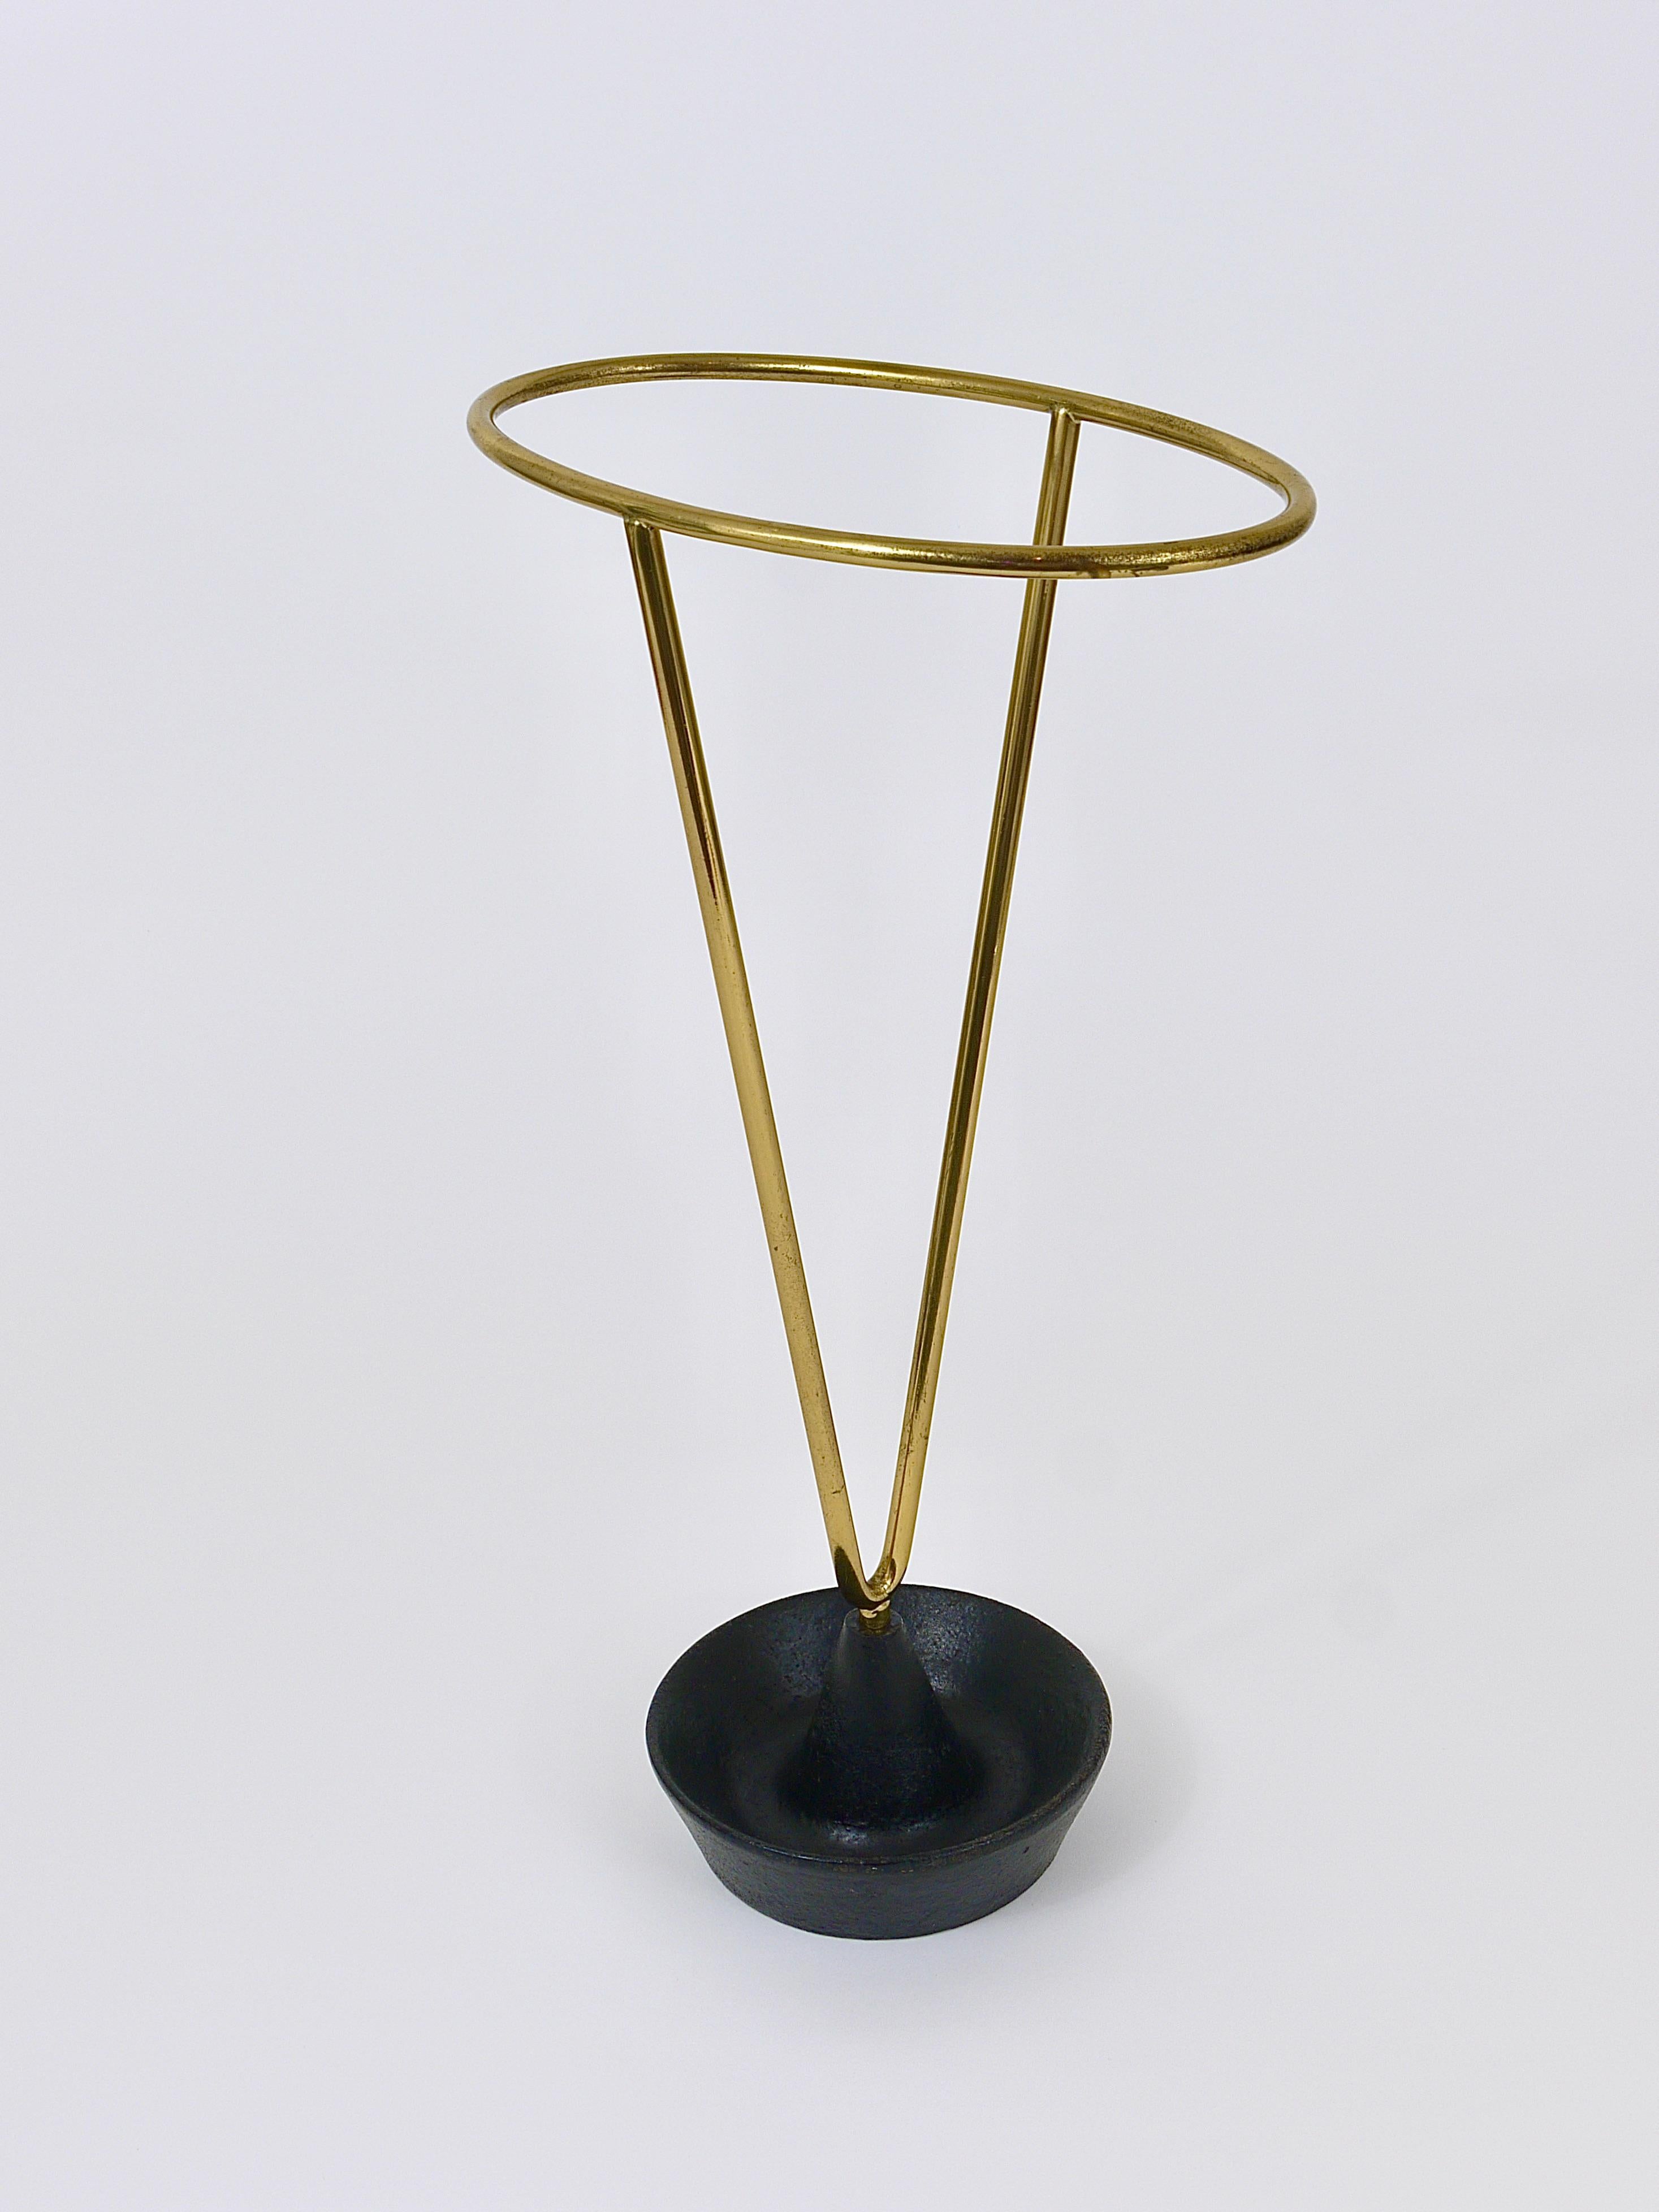 20th Century Carl Auböck Mid-Century Brass and Cast Iron Umbrella Stand, Austria, 1950s For Sale